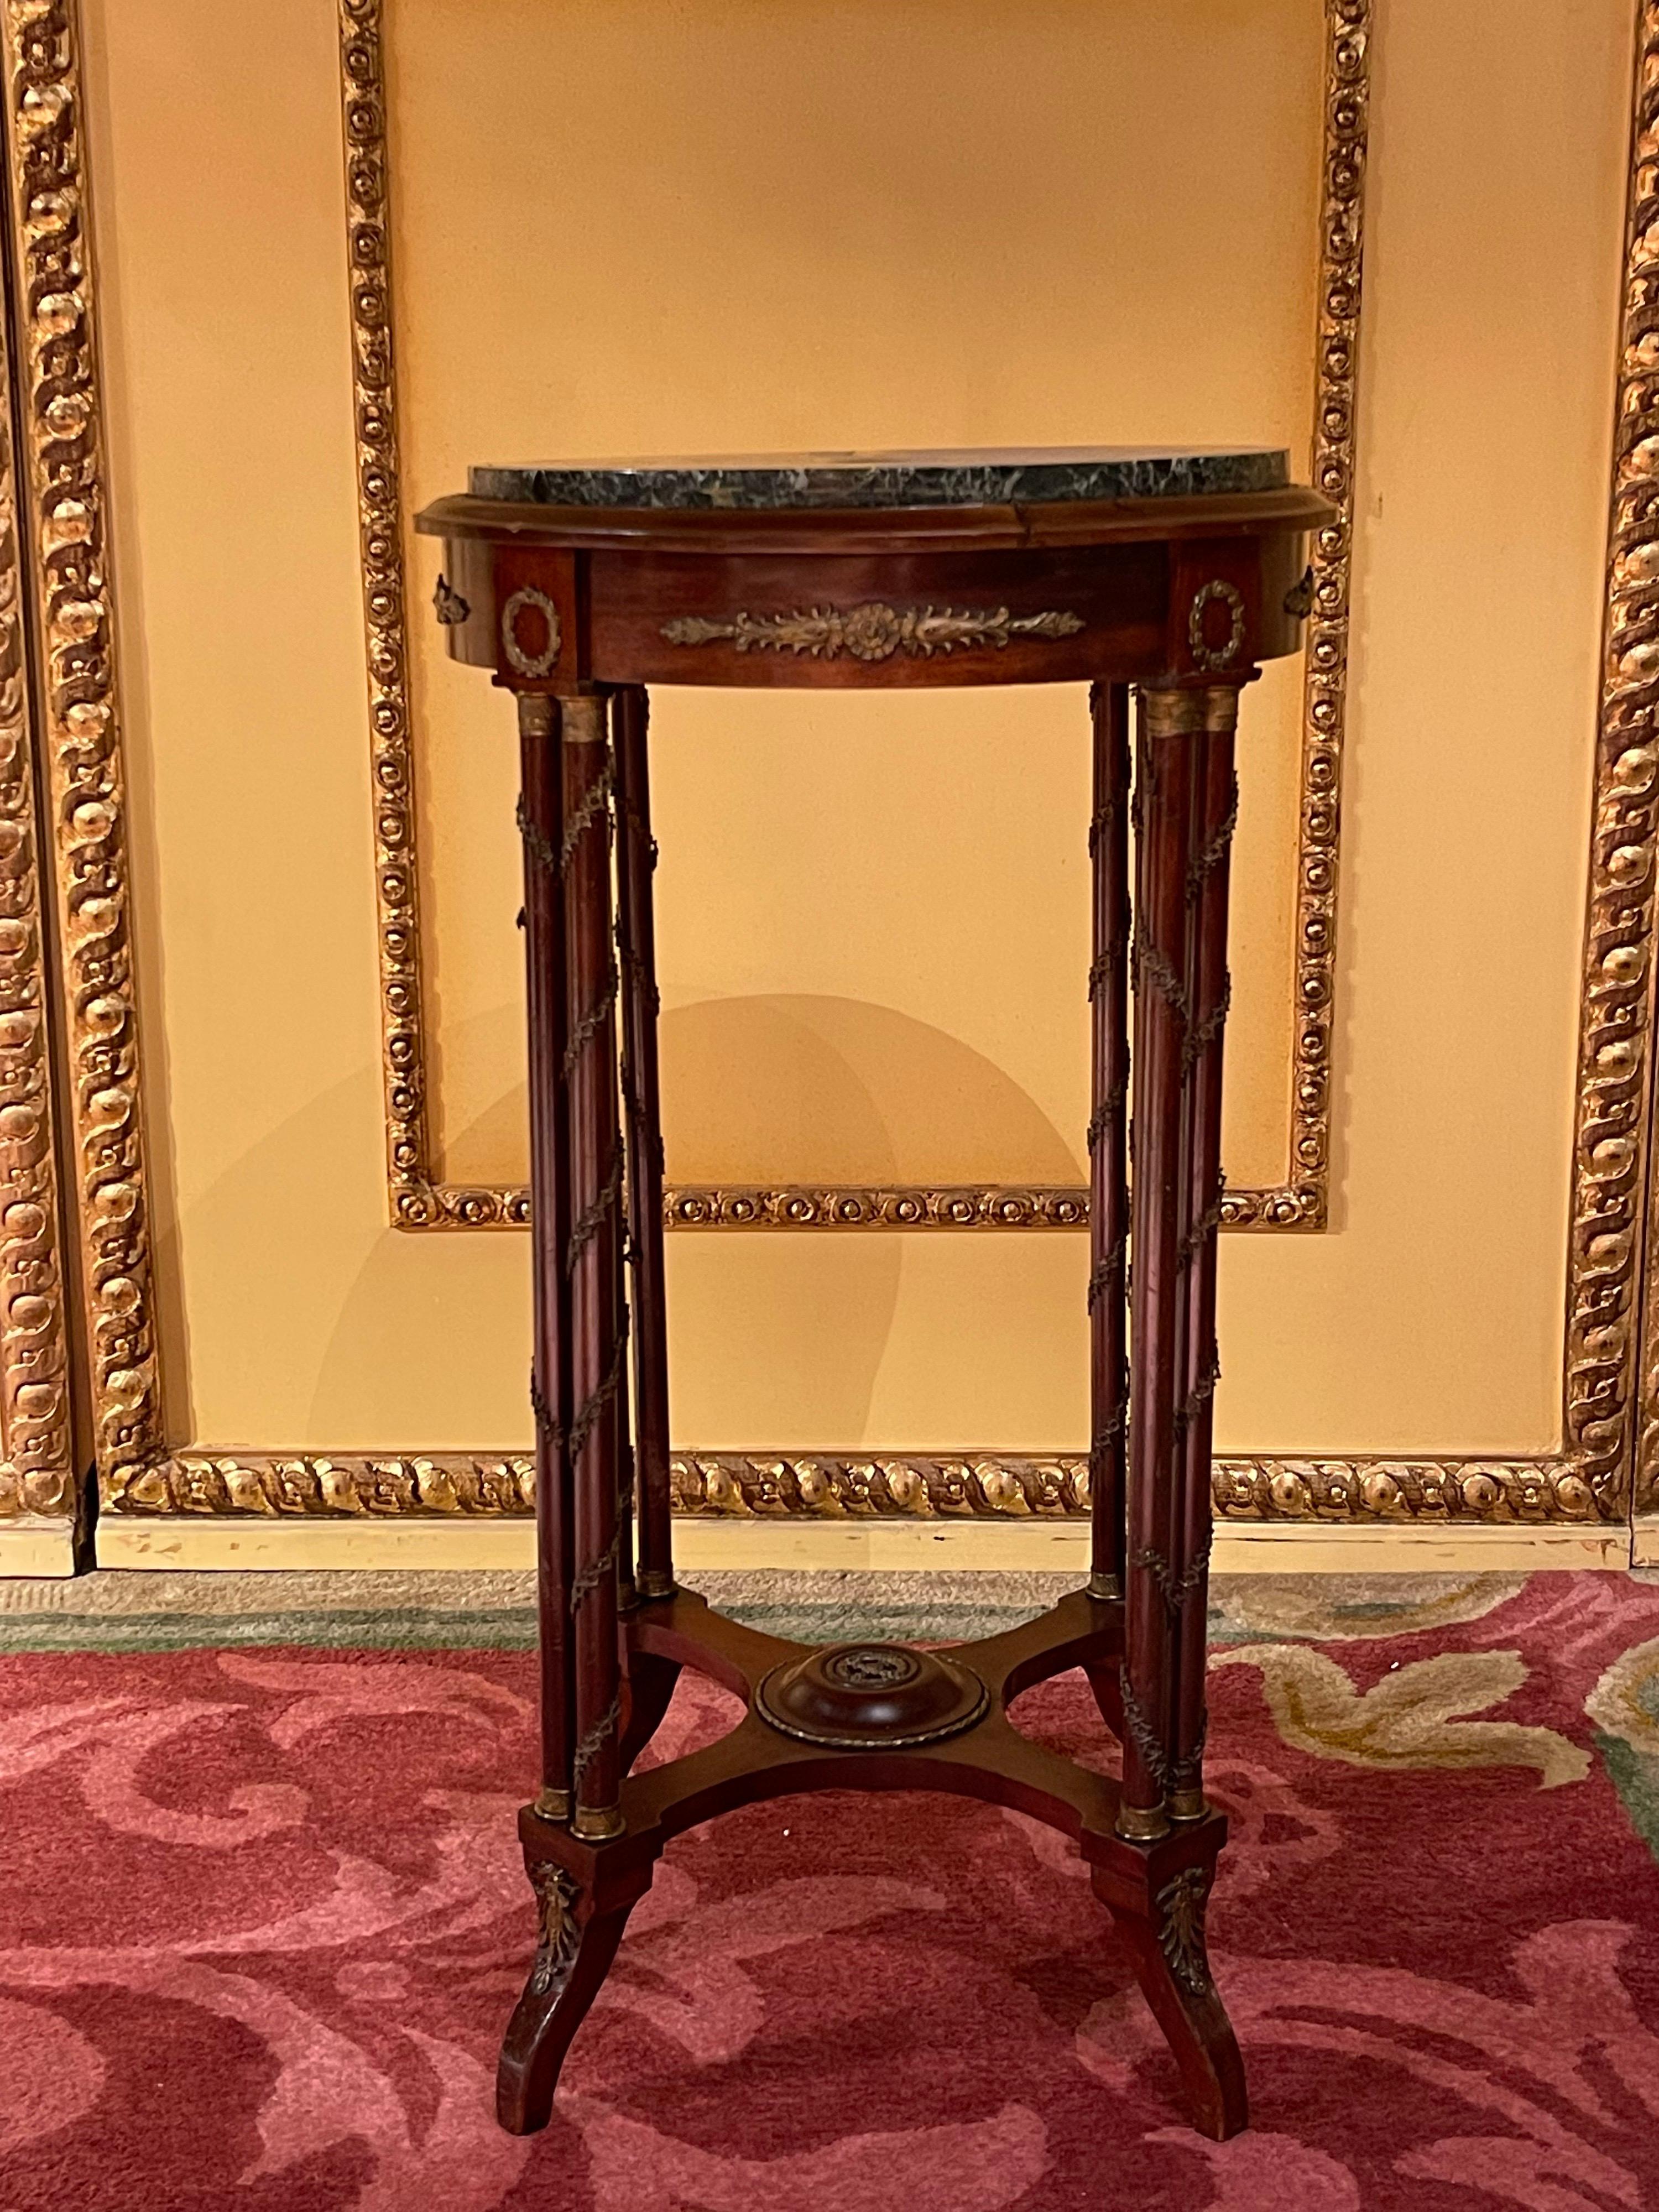 French gueridon/side table with bronze Napoleon III

Solid mahogany wood with rich brass trim. Four-pass marbled cover plate with brass gallery edging on fluted pillar frame with clipboard. France at the end of the 19th century.